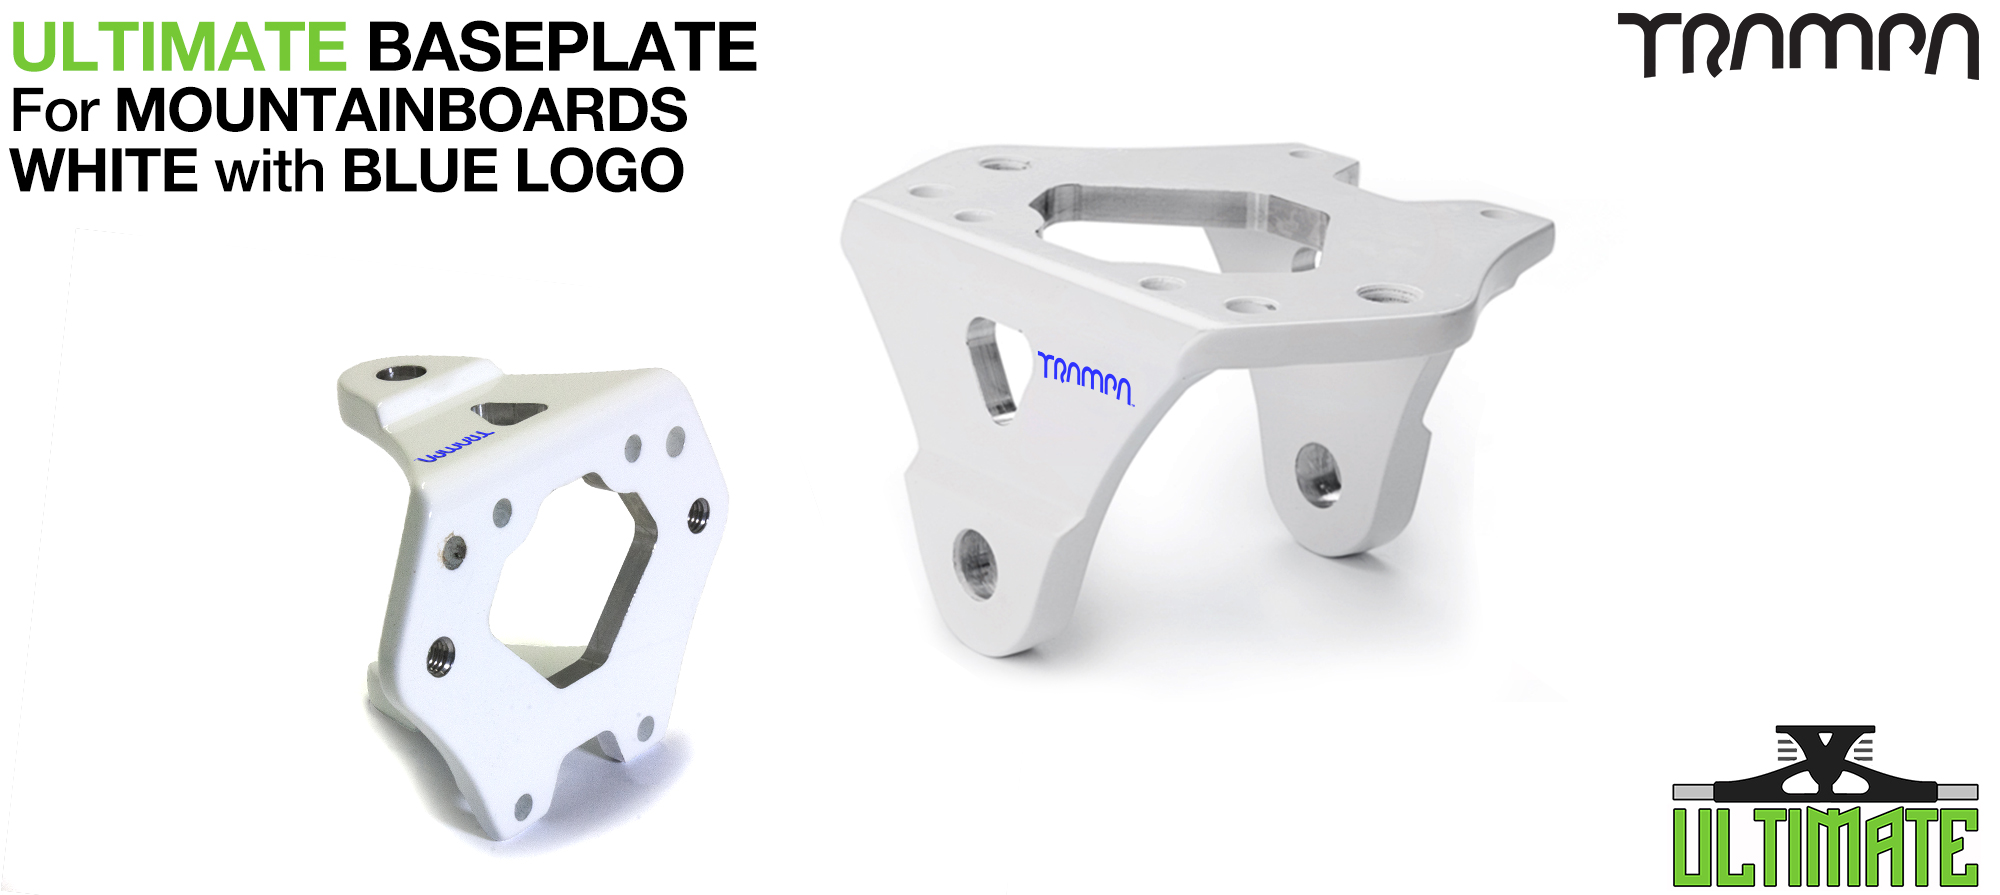 WHITE with BLUE logo Baseplate 